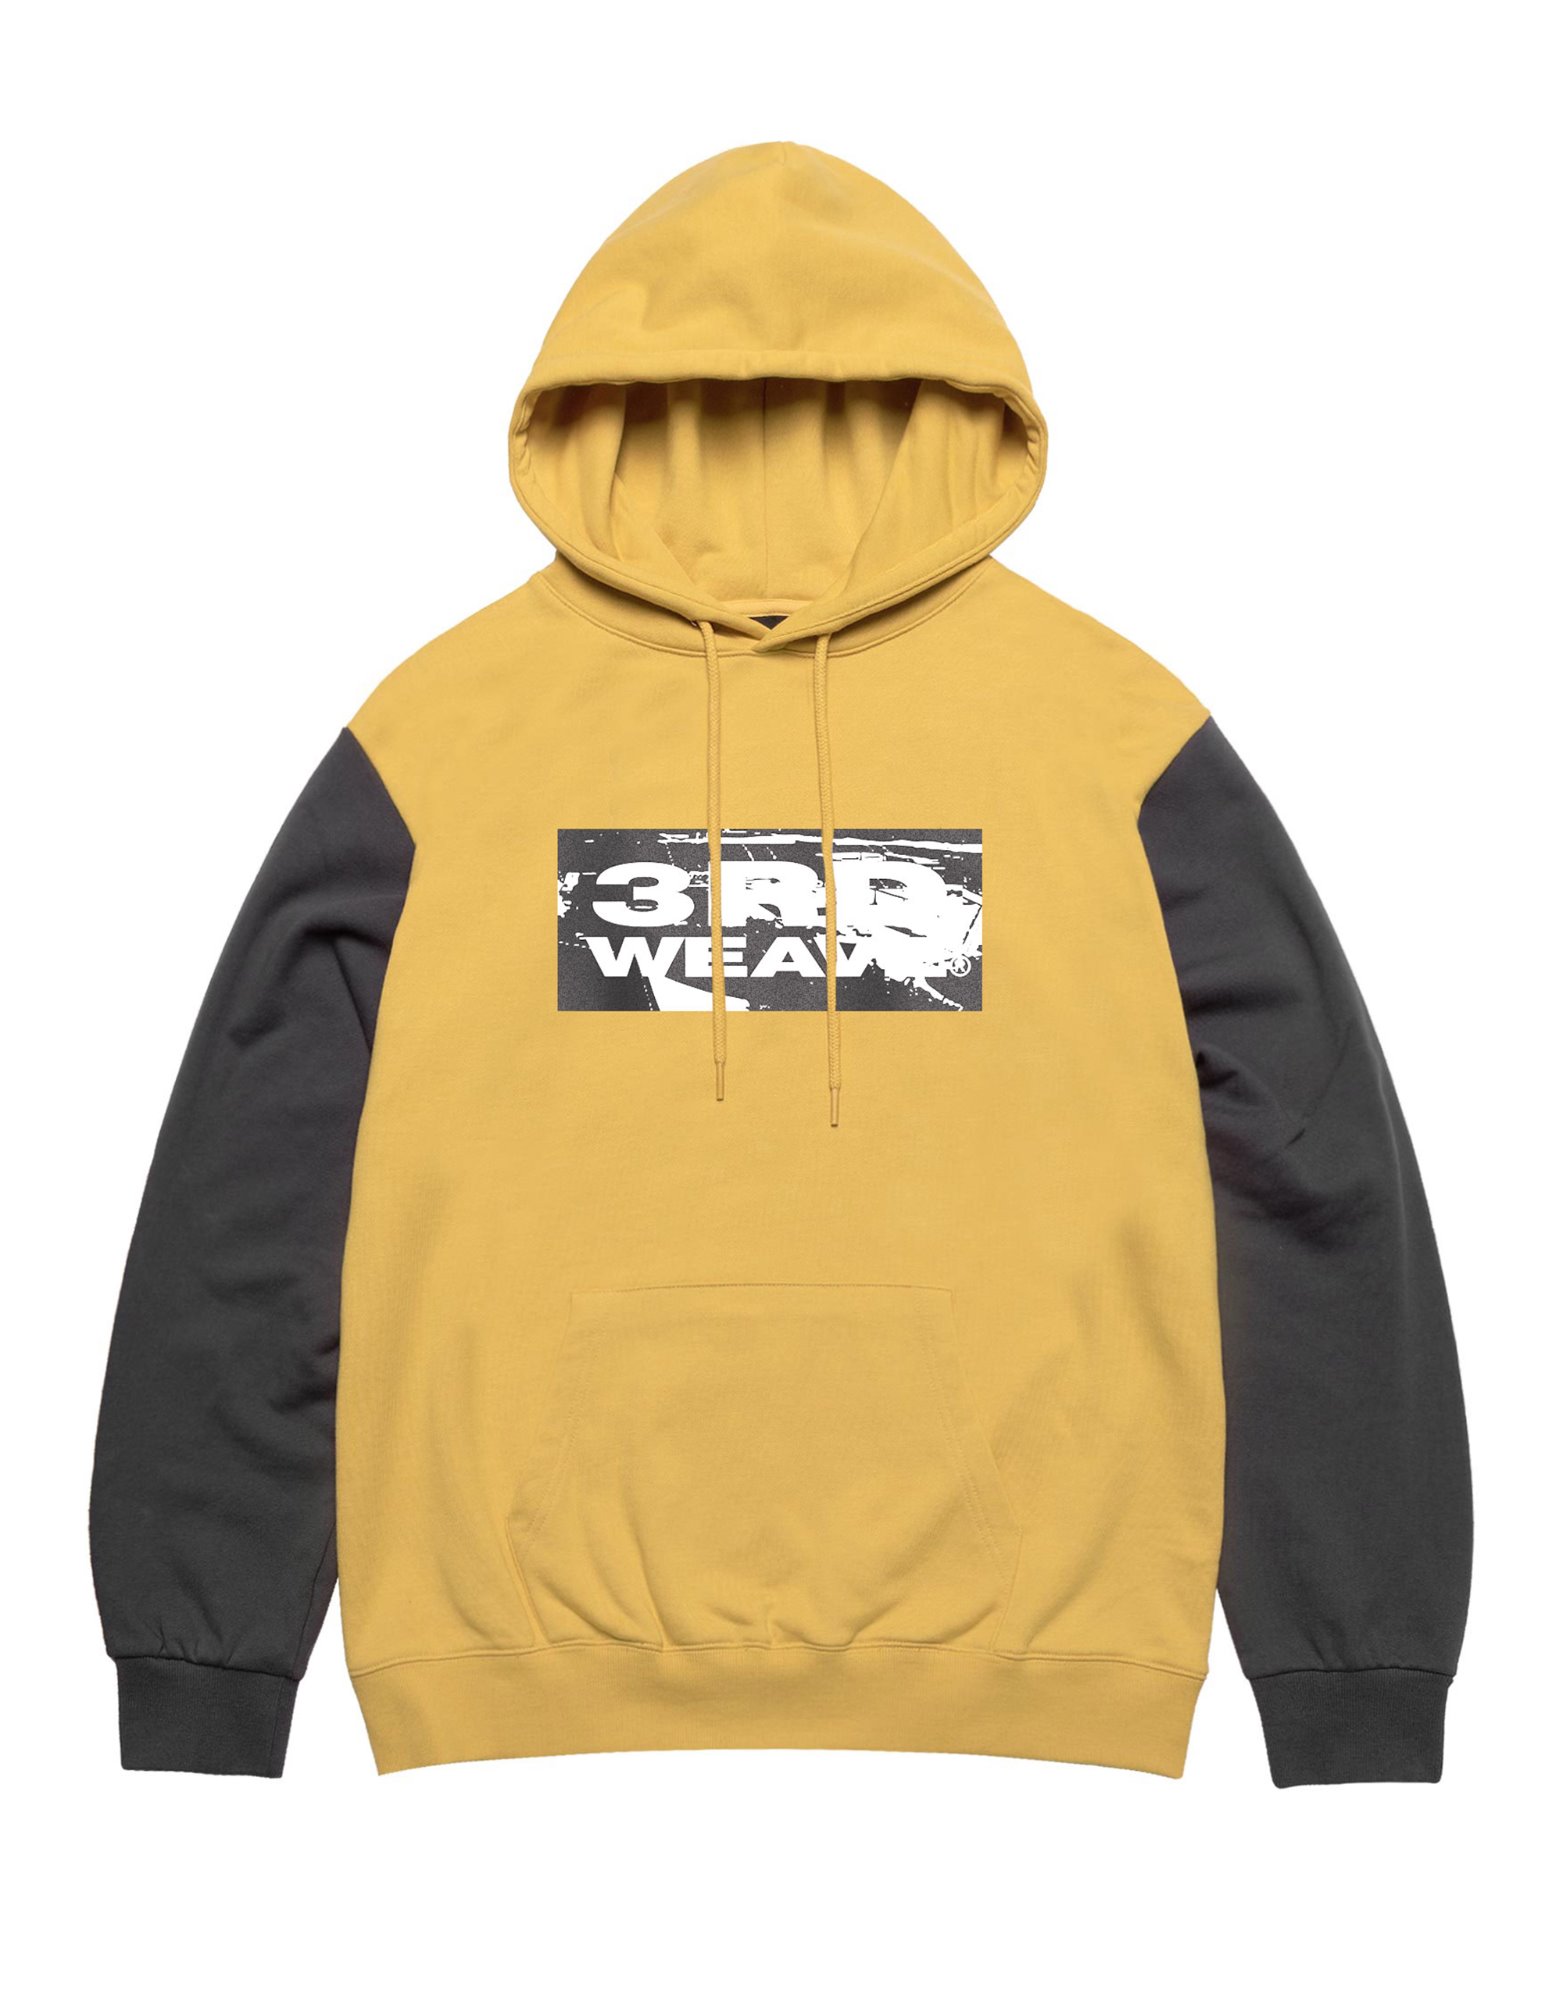 COLOR COMBINATION HOODIE / YELLOW